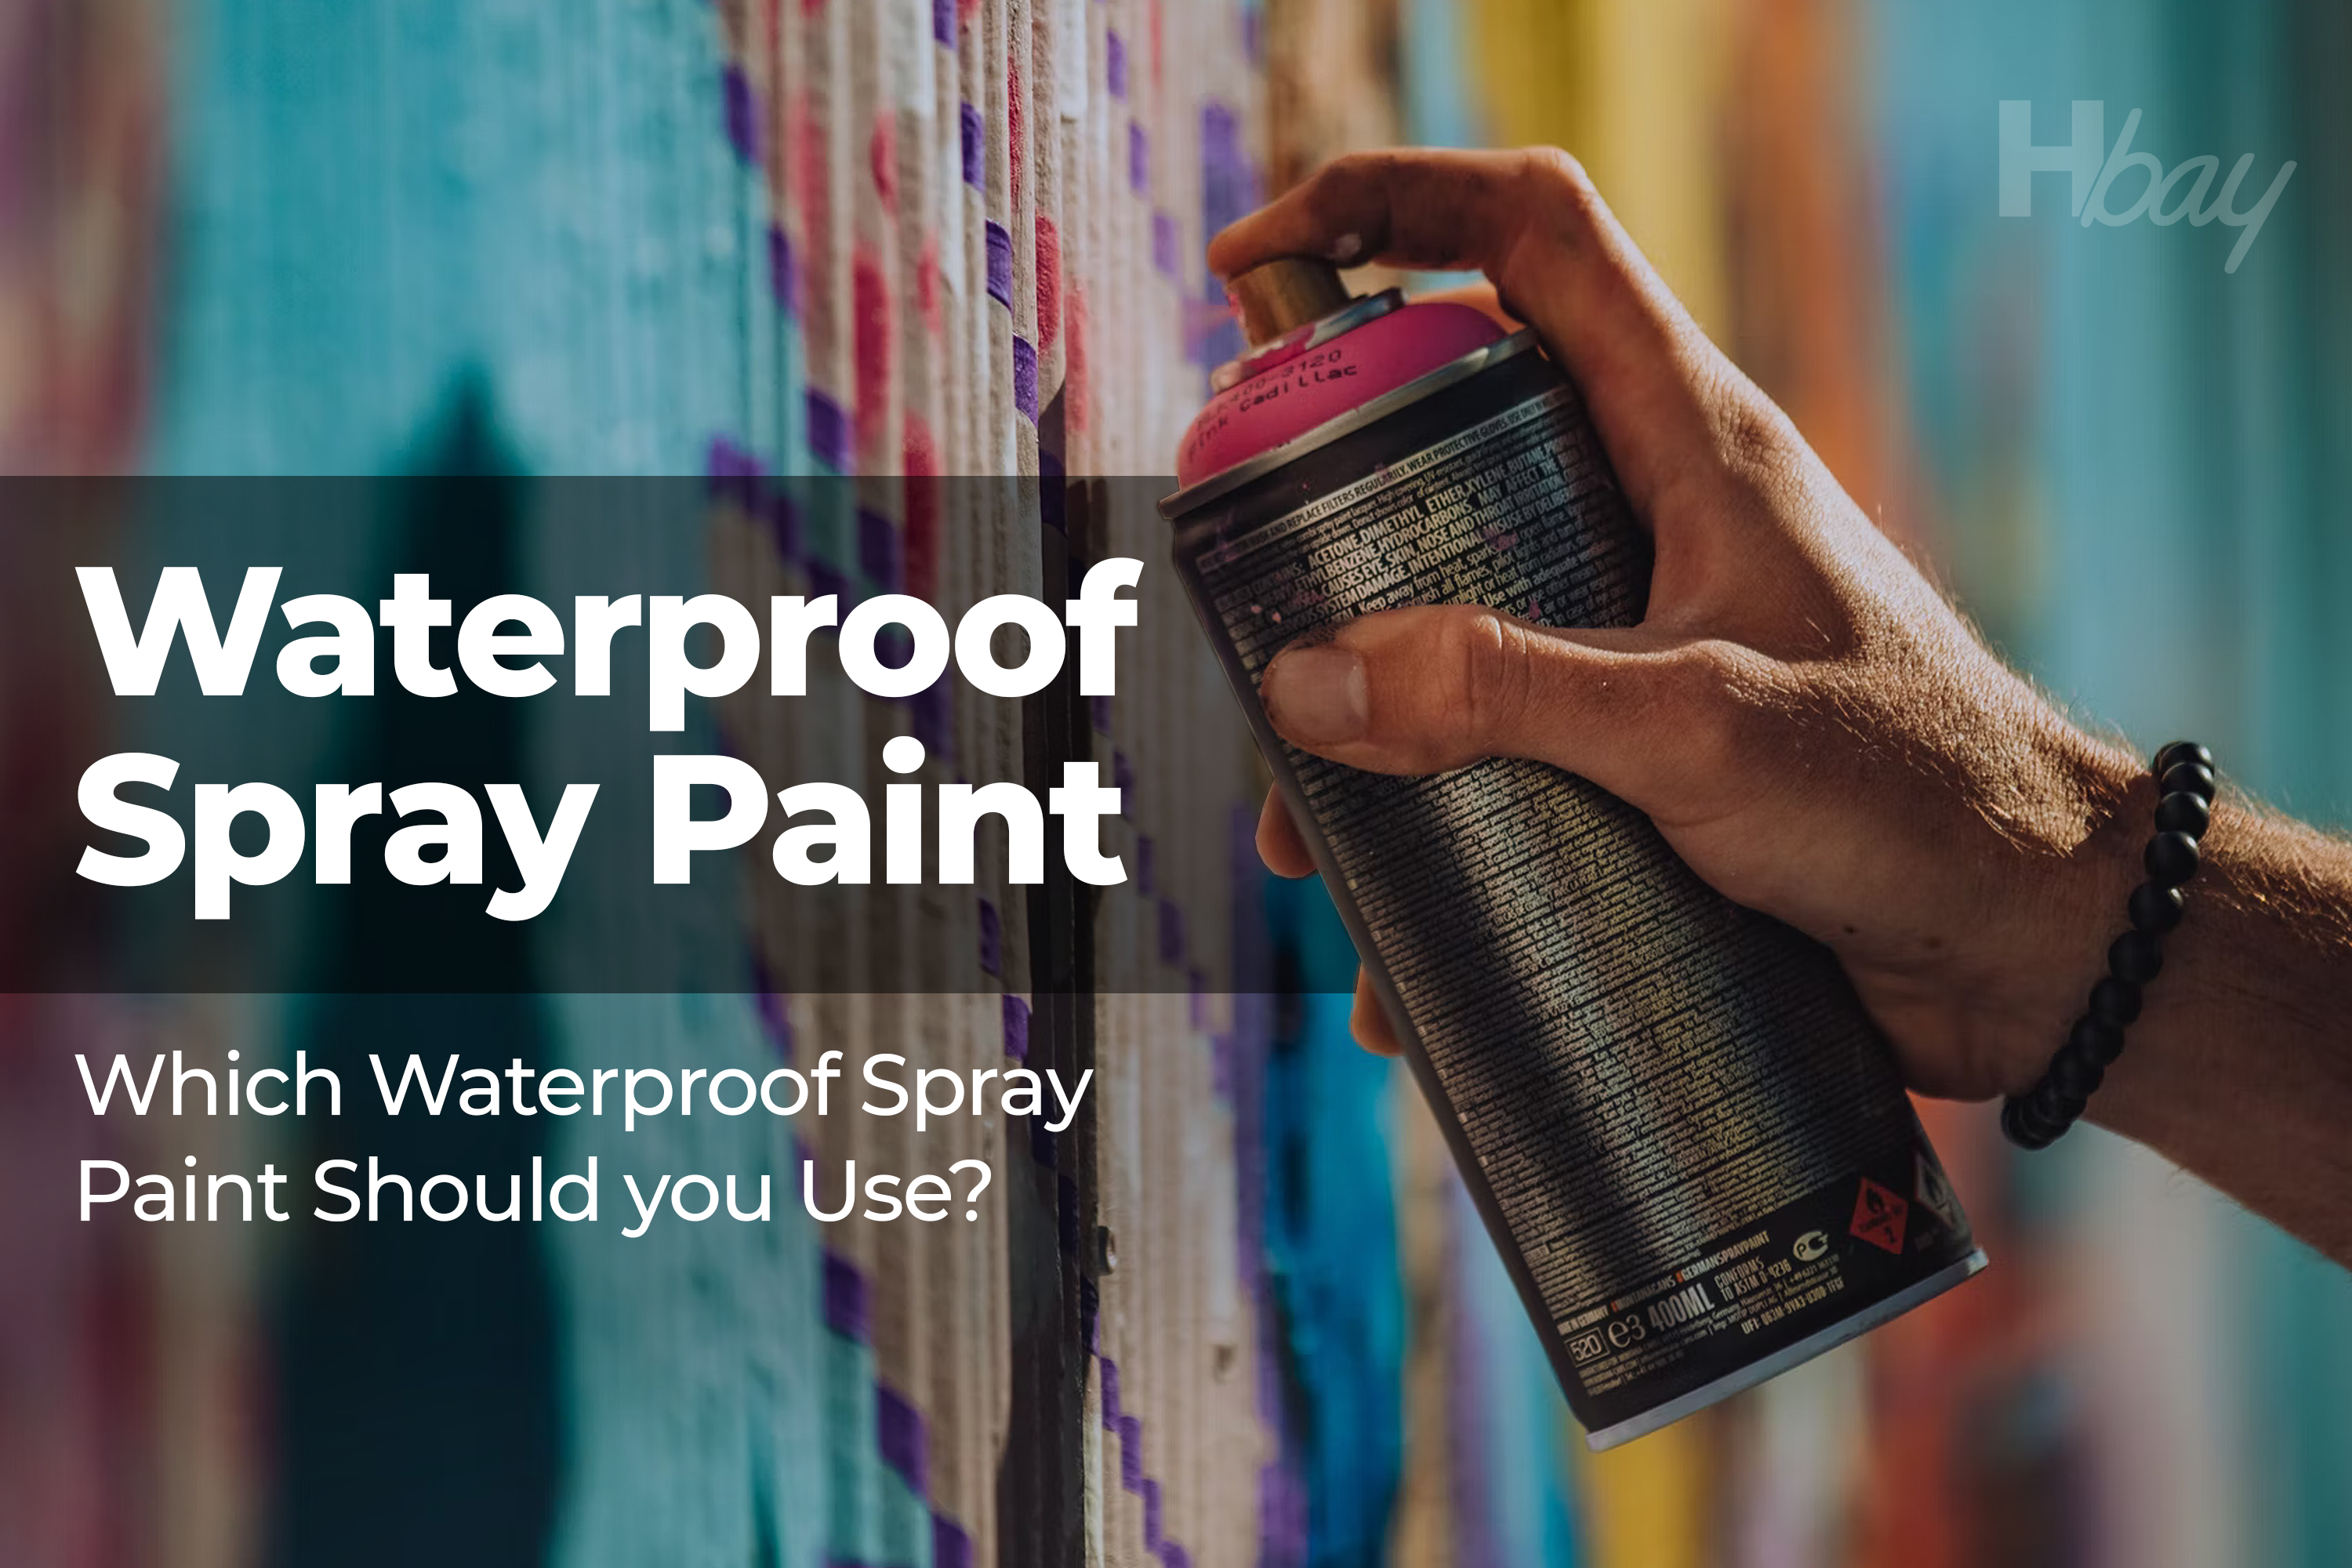 Is There a Waterproof Spray Paint